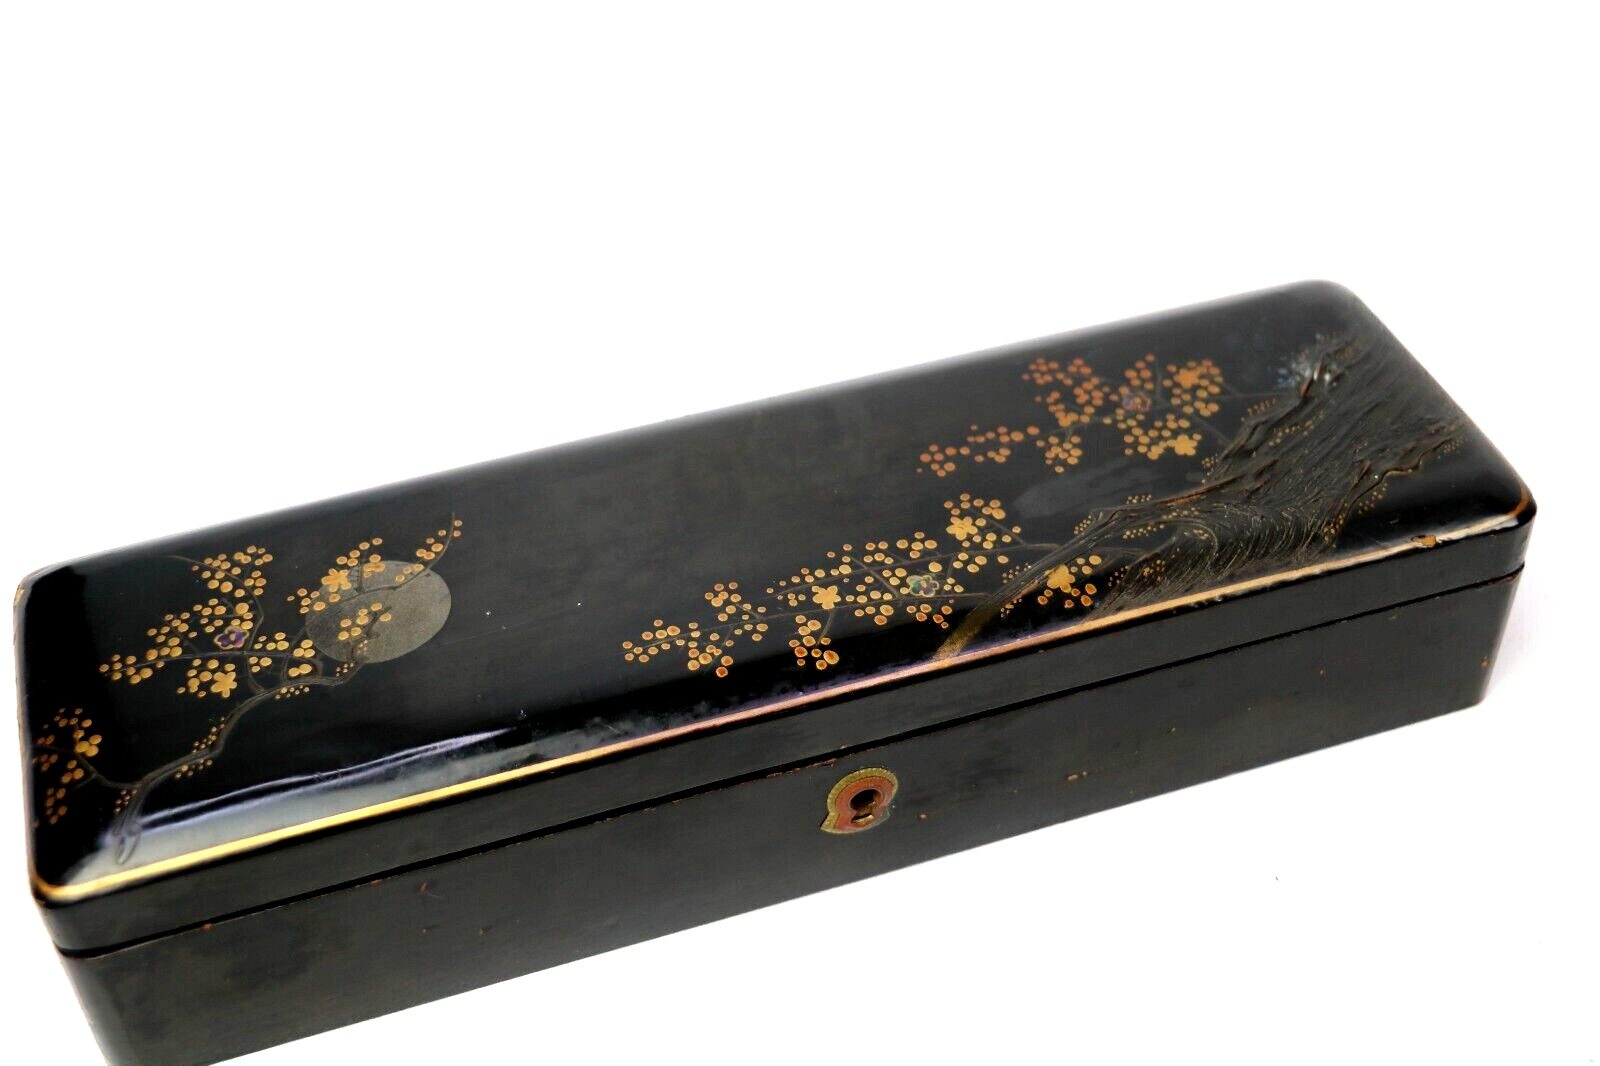 Antique Japanese Lacquer Maki-e Wooden Box, Brush/Pencil Case Made in Japan